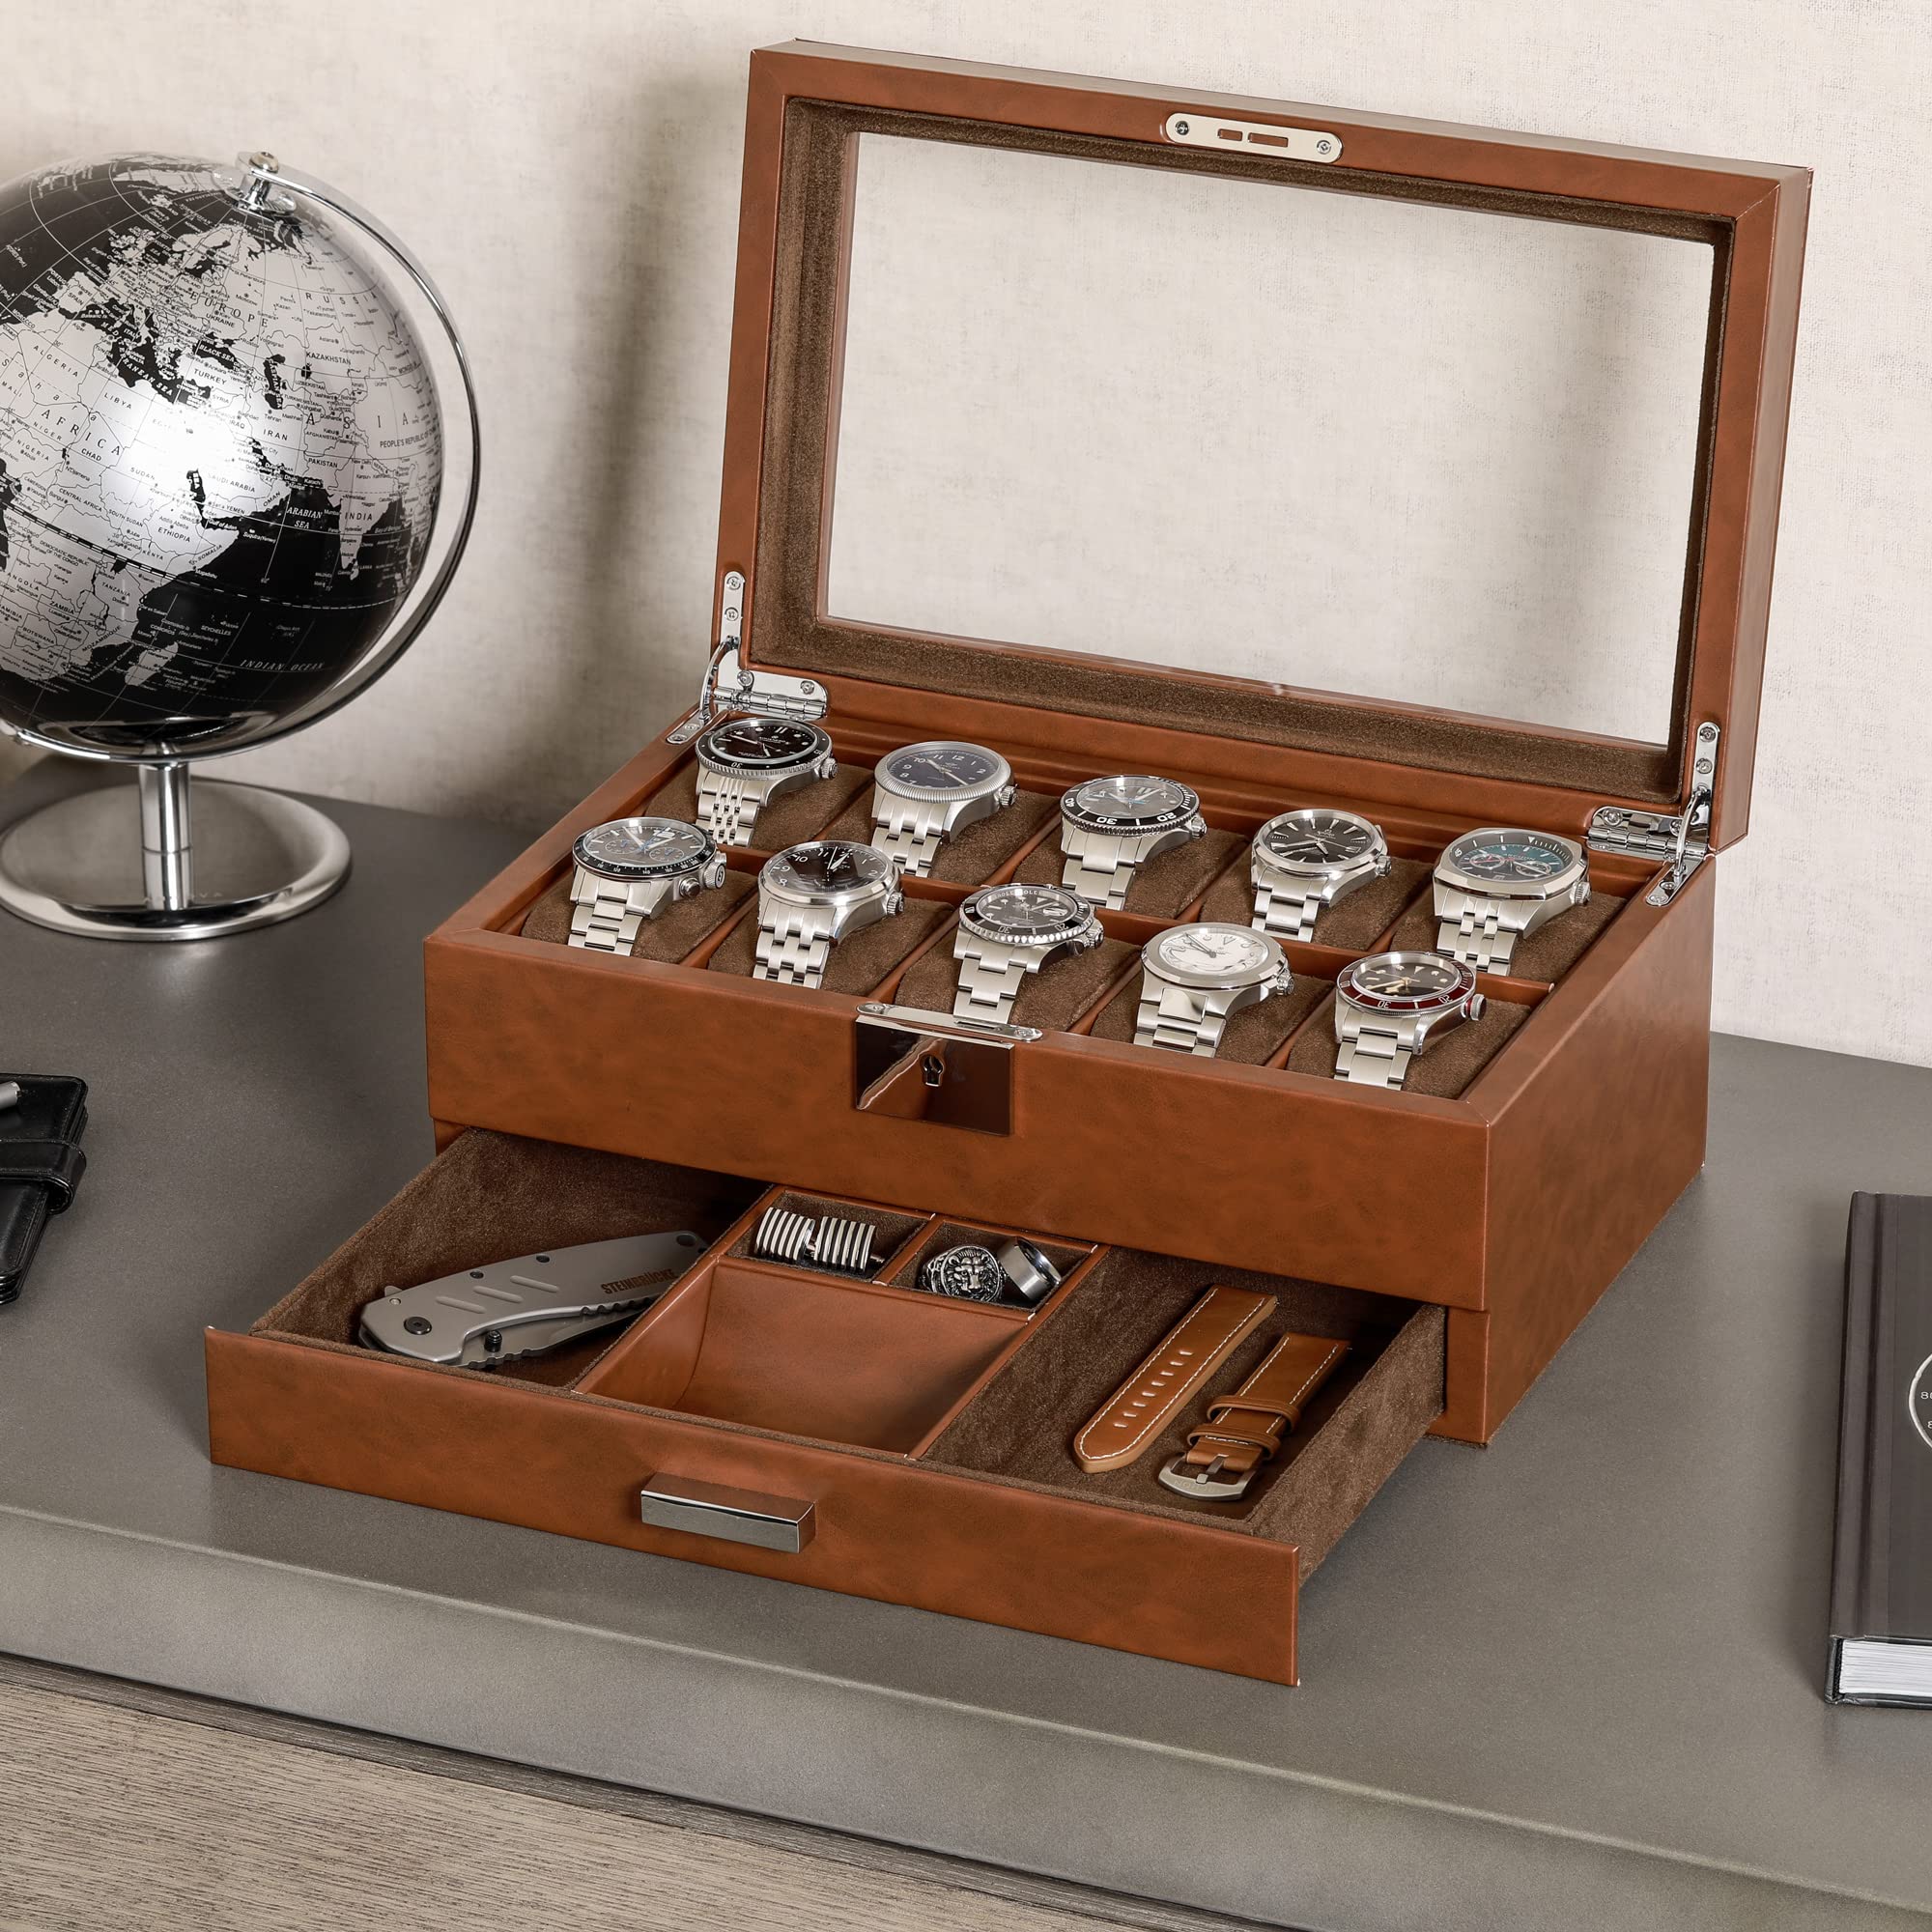 Gift Set 10 Slot Leather Watch Box with Valet Drawer & Matching 5 Watch Travel Case - Luxury Watch Case Display Organizer, Locking Mens Jewelry Watches Holder, Men's Storage Boxes Glass Top Tan/Brown